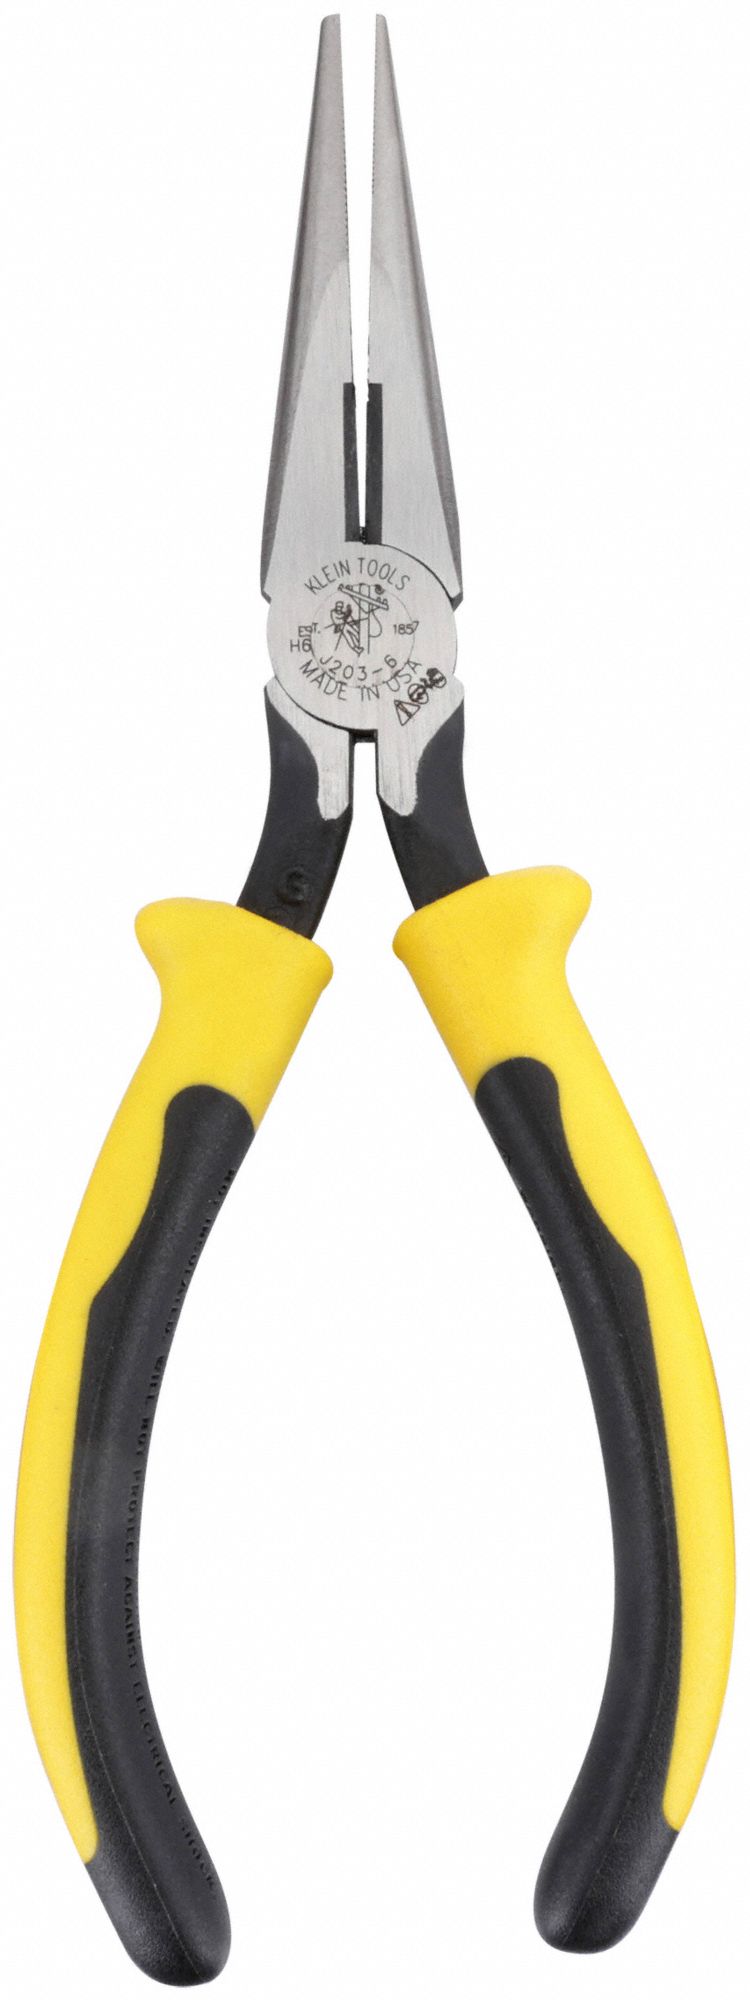 2 in Max Jaw Opening, 6 5/8 in Overall Lg, Needle Nose Plier